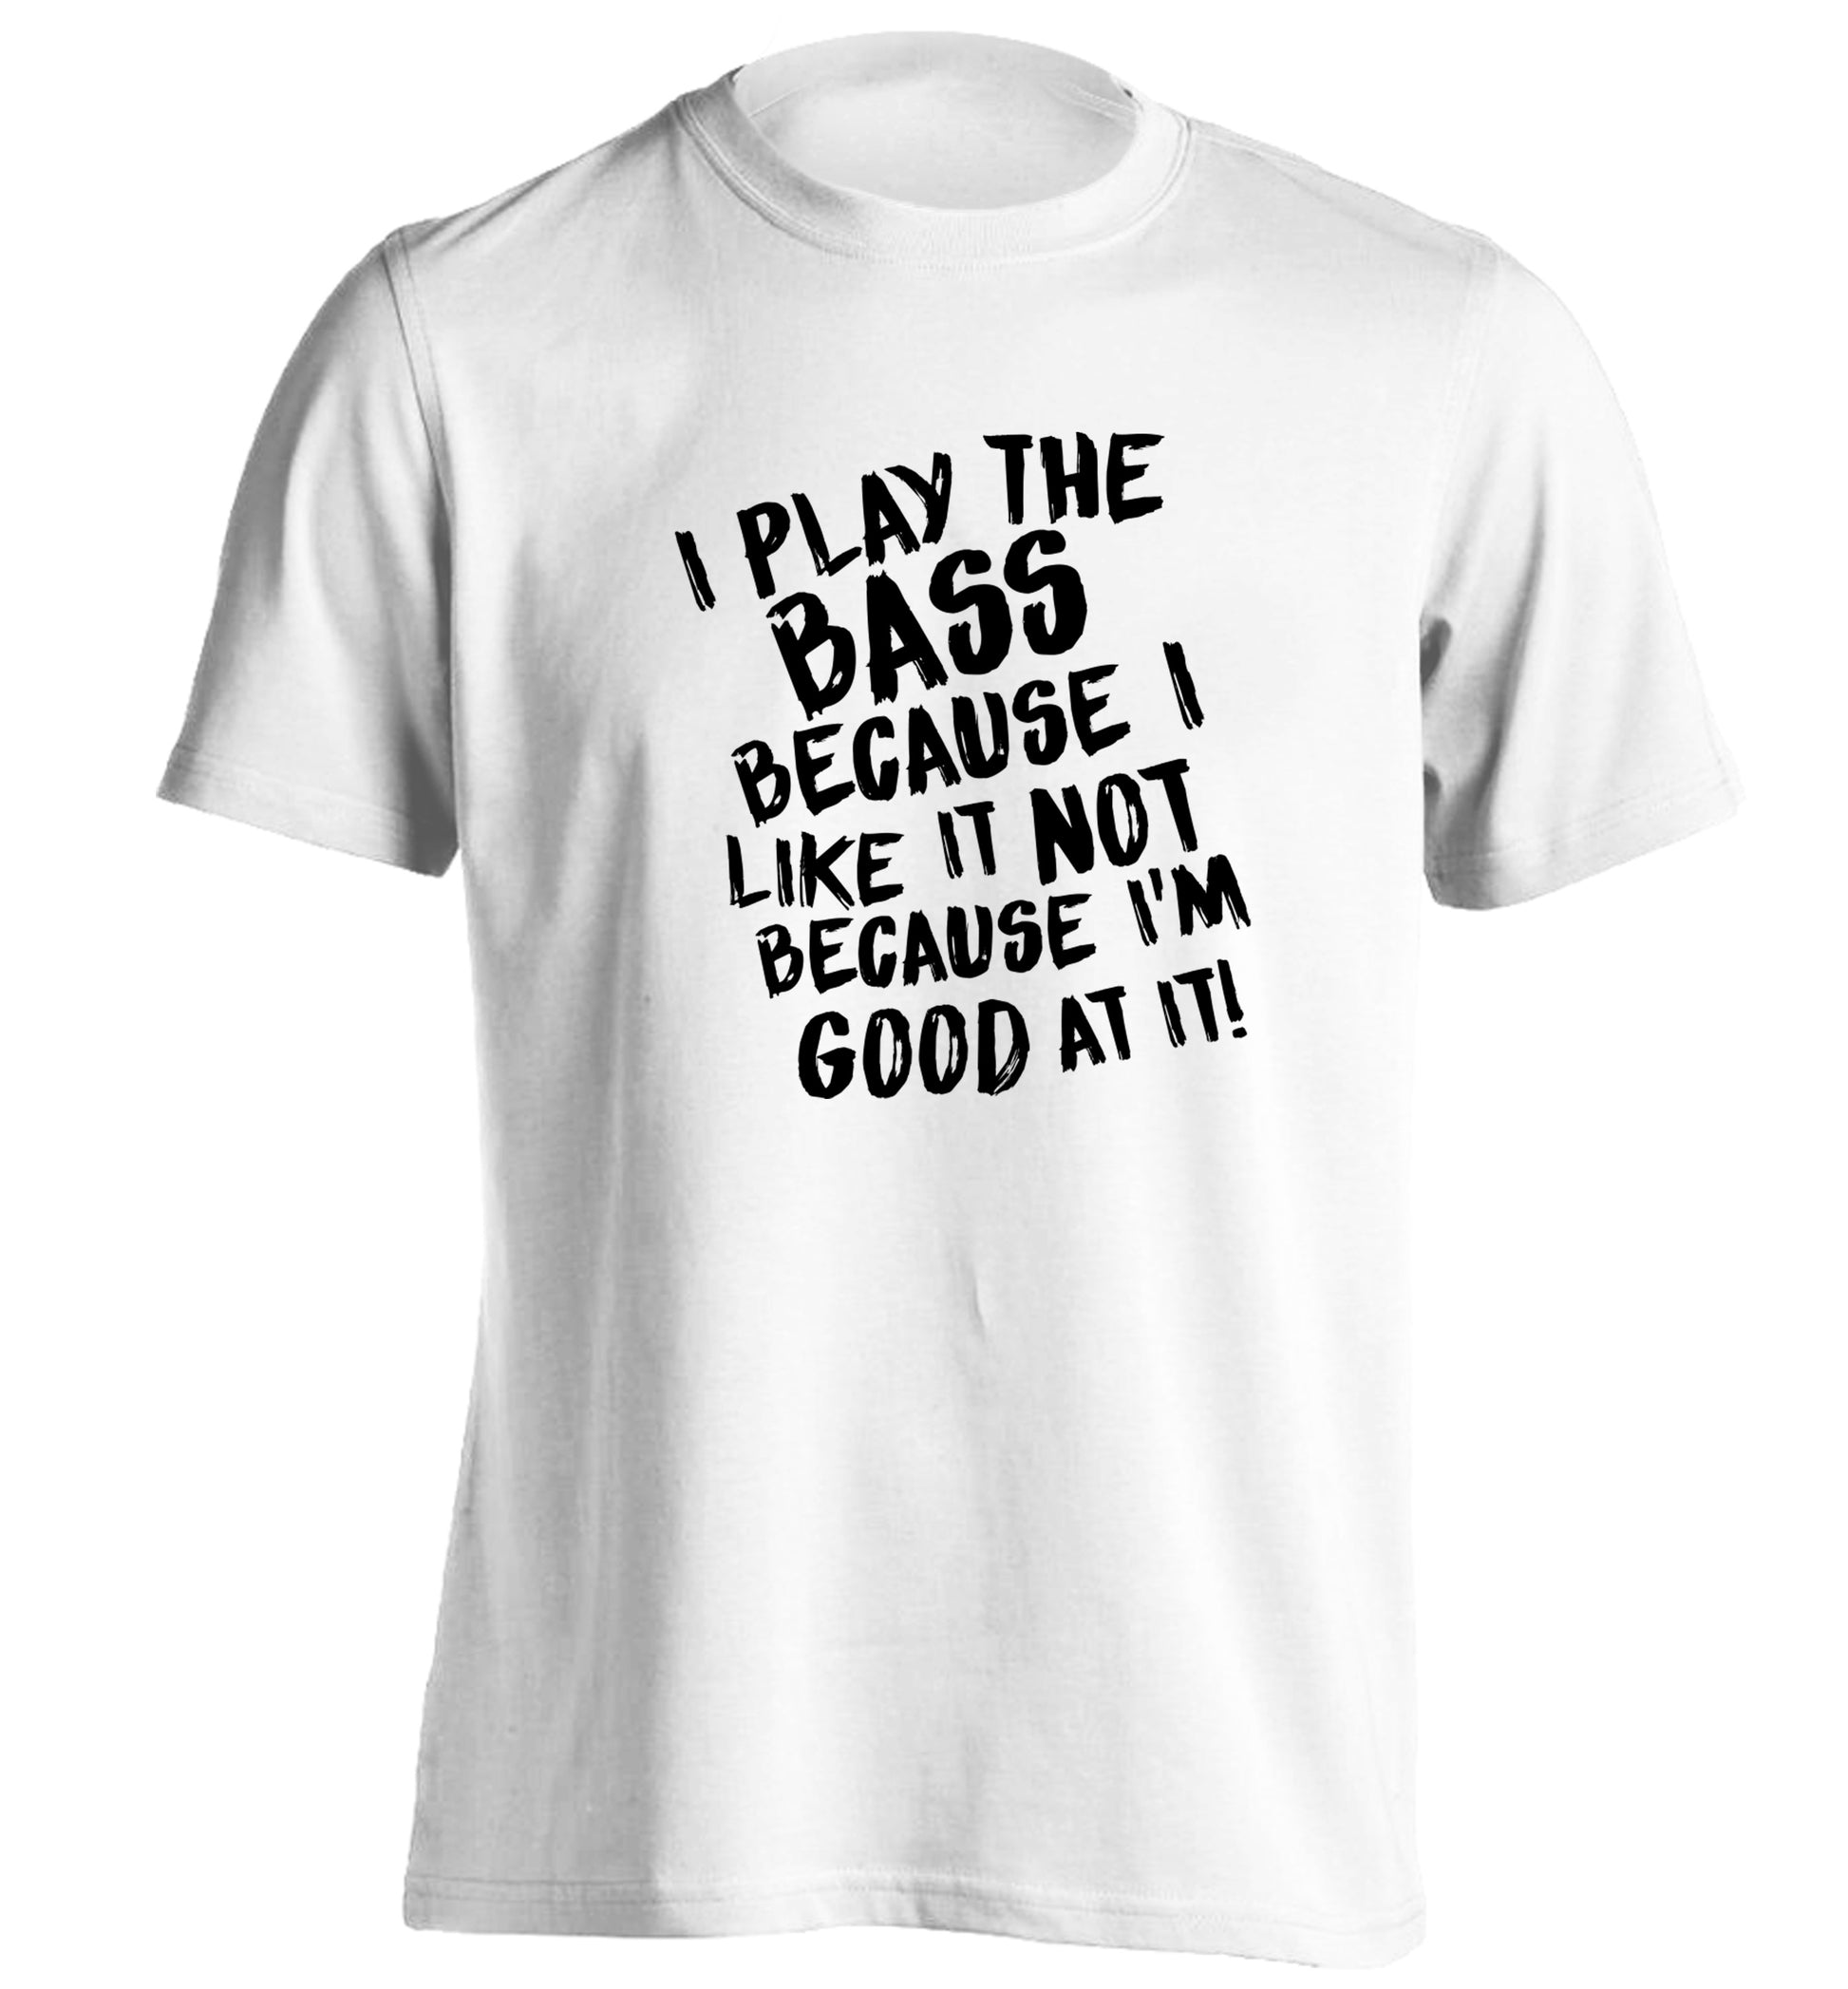 I play the bass because I like it not because I'm good at it adults unisex white Tshirt 2XL